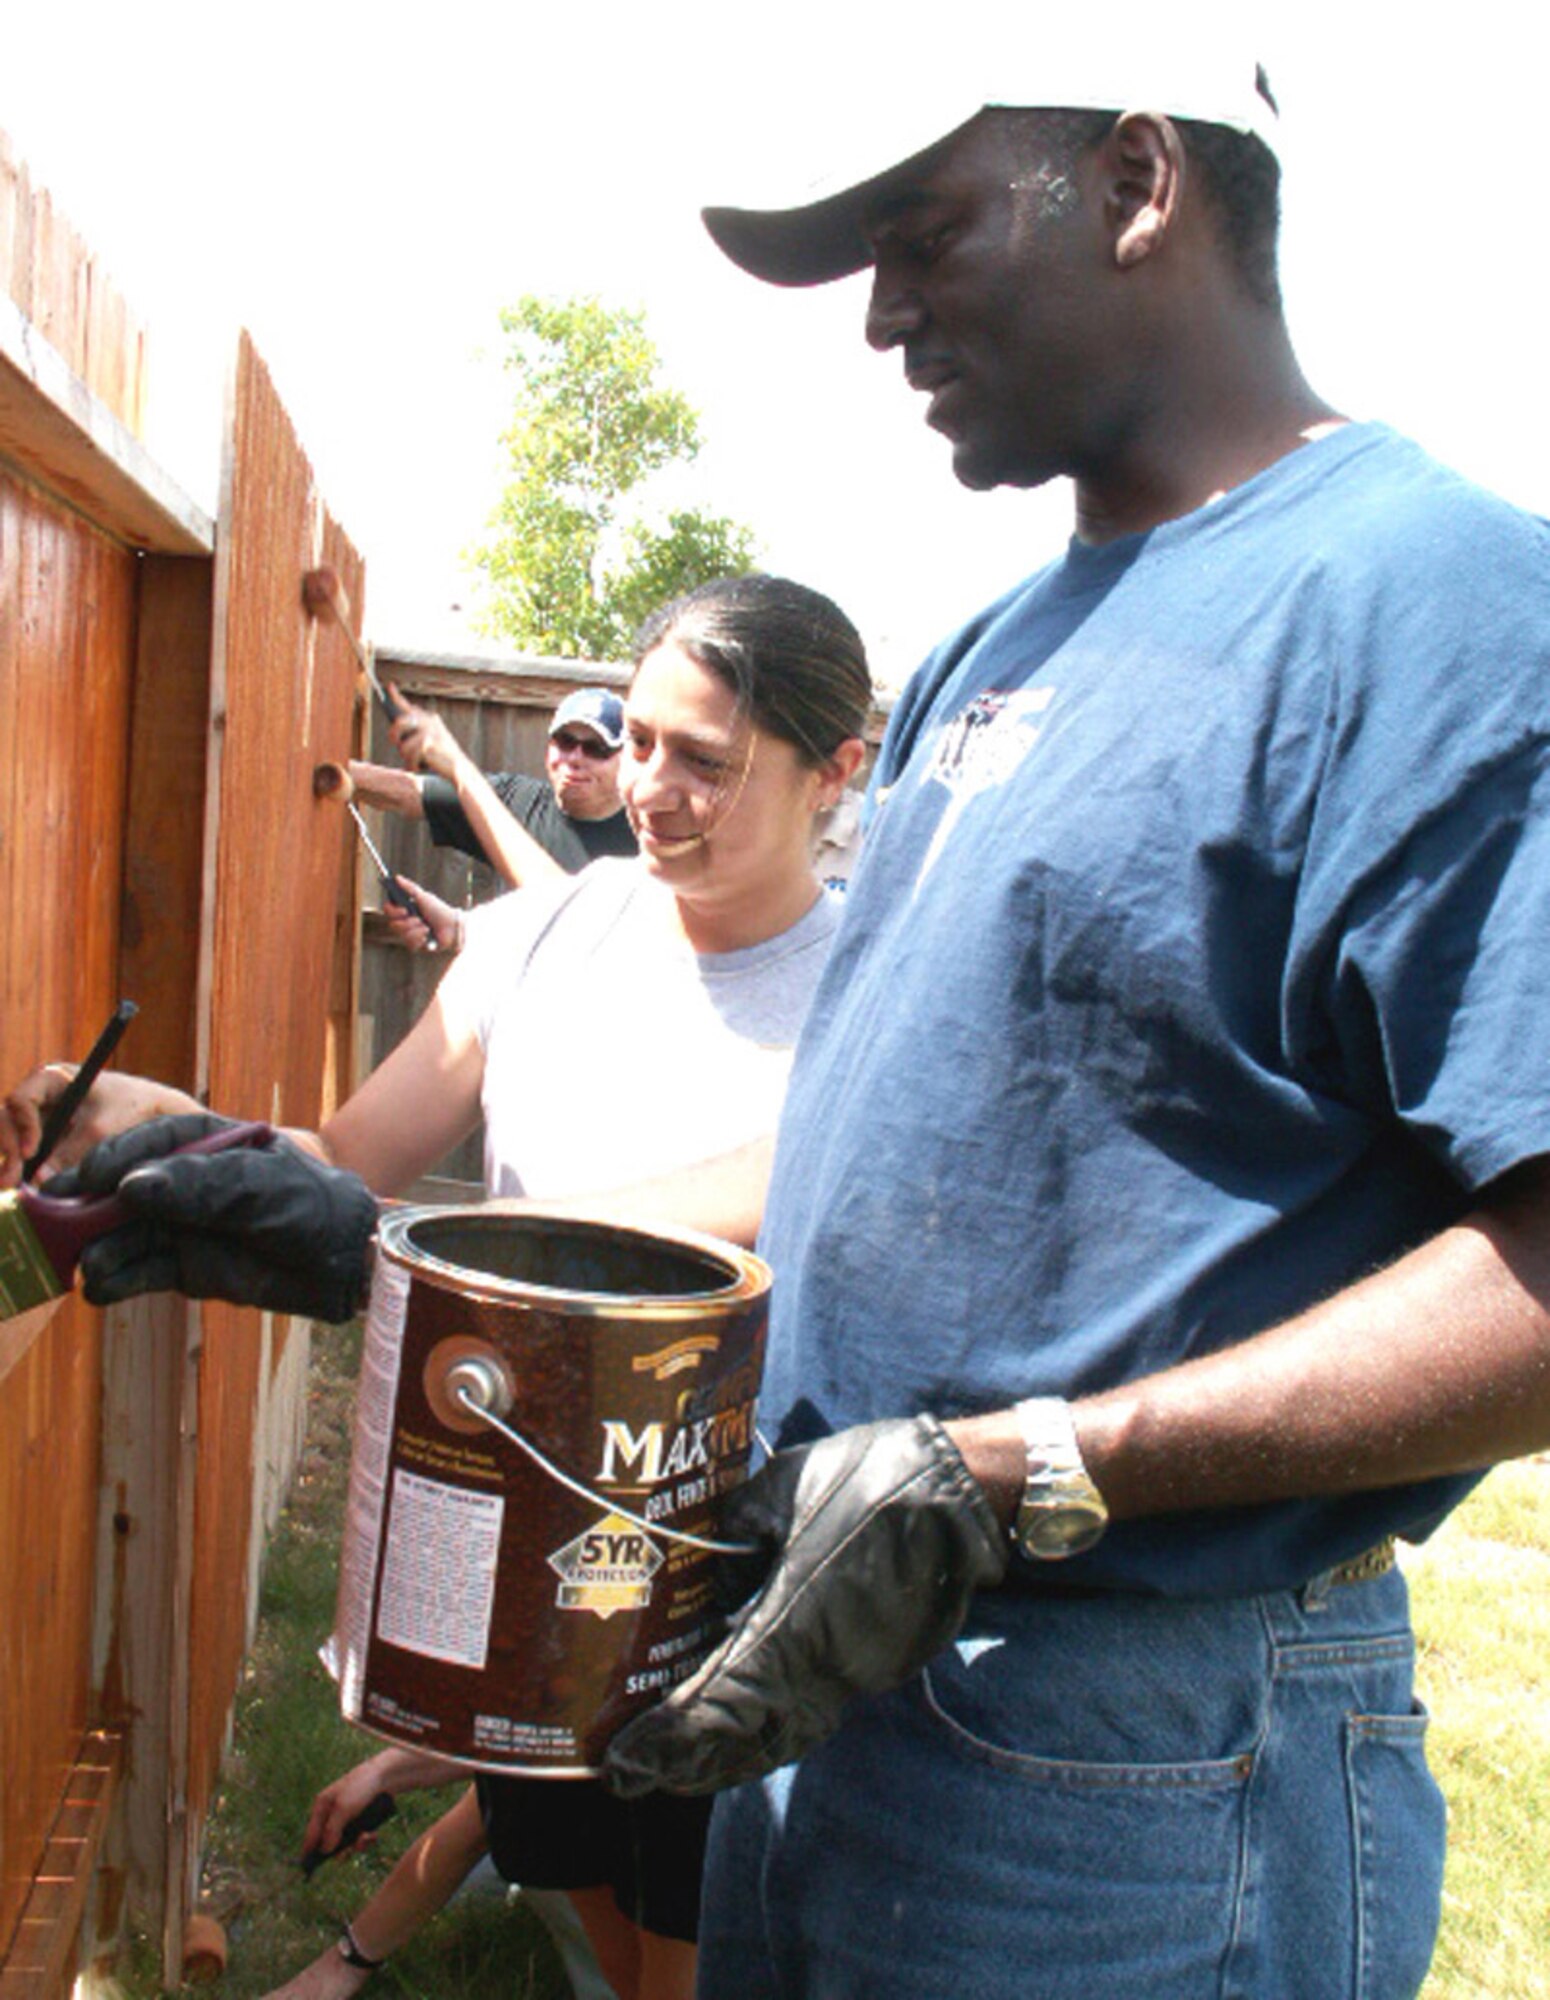 Tech. Sgt. Becca Dahl (left) and Master Sgt. Ken Pittman apply waterproofing to a fence as part of a volunteer effort supporting Operation Homefront April 30 in Cibolo, Texas. Volunteers from the Top 3 Association from Air Force Personnel Center from Randolph Air Force Base, Texas, helped craft a gate to provide better access between the front and back yards for Tech. Sgt. Israel Del Toro, an Airman recovering from wounds sustained during a roadside bombing in Afghanistan. Sergeants Dahl and Pittman are personnelists at AFPC. (U.S. Air Force photo/Master Sgt. Kat Bailey)
